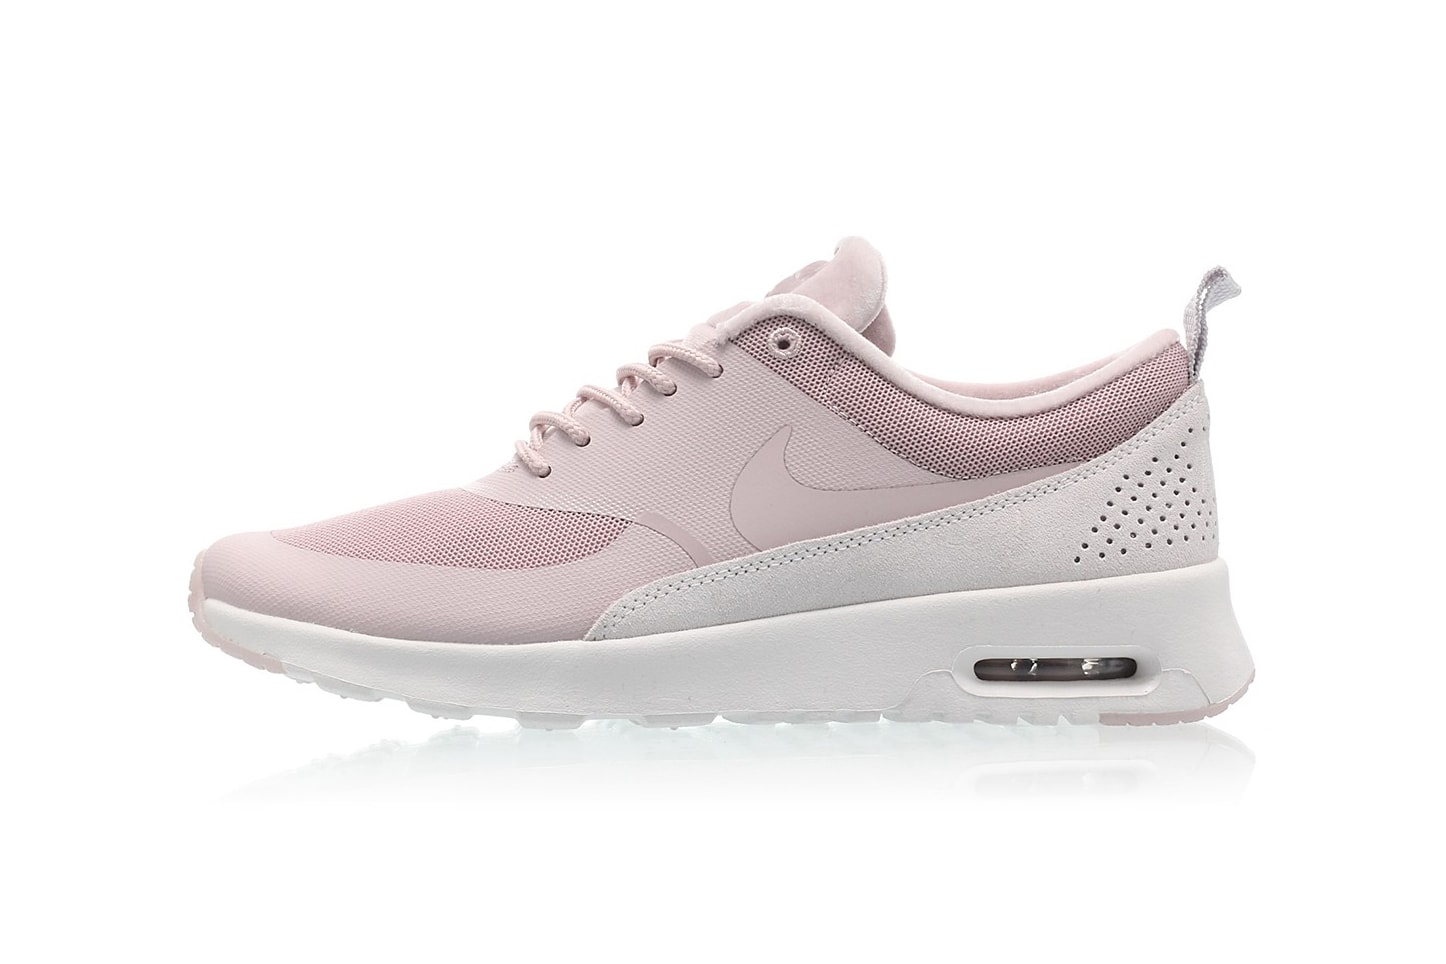 Nike Air Max LX in Particle Rose Pink |